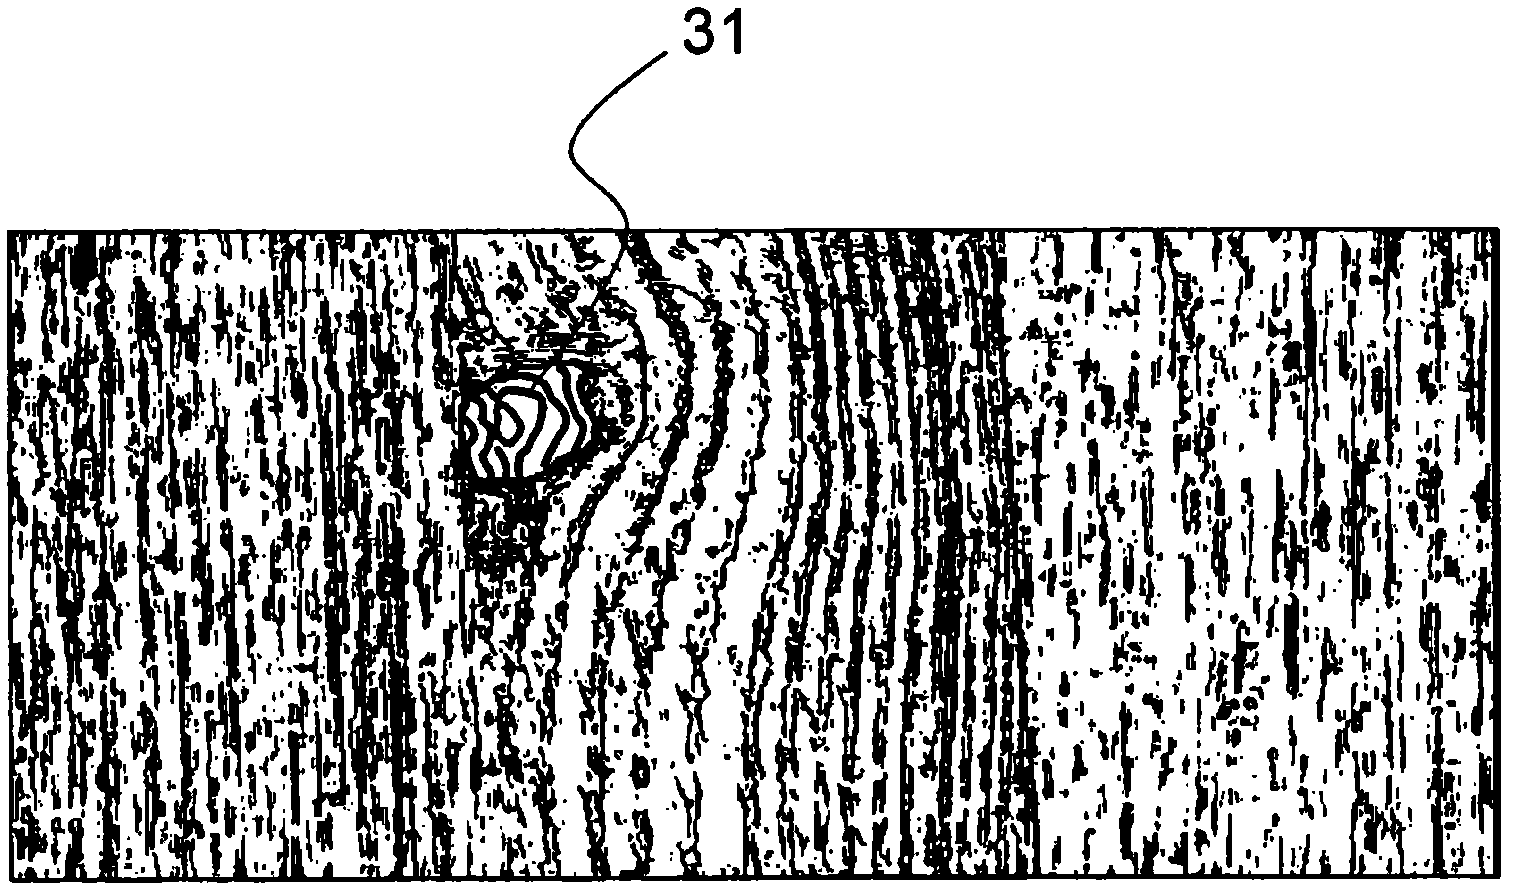 Automatic repair of flat, textured objects, such as wood panels having aesthetic reconstruction